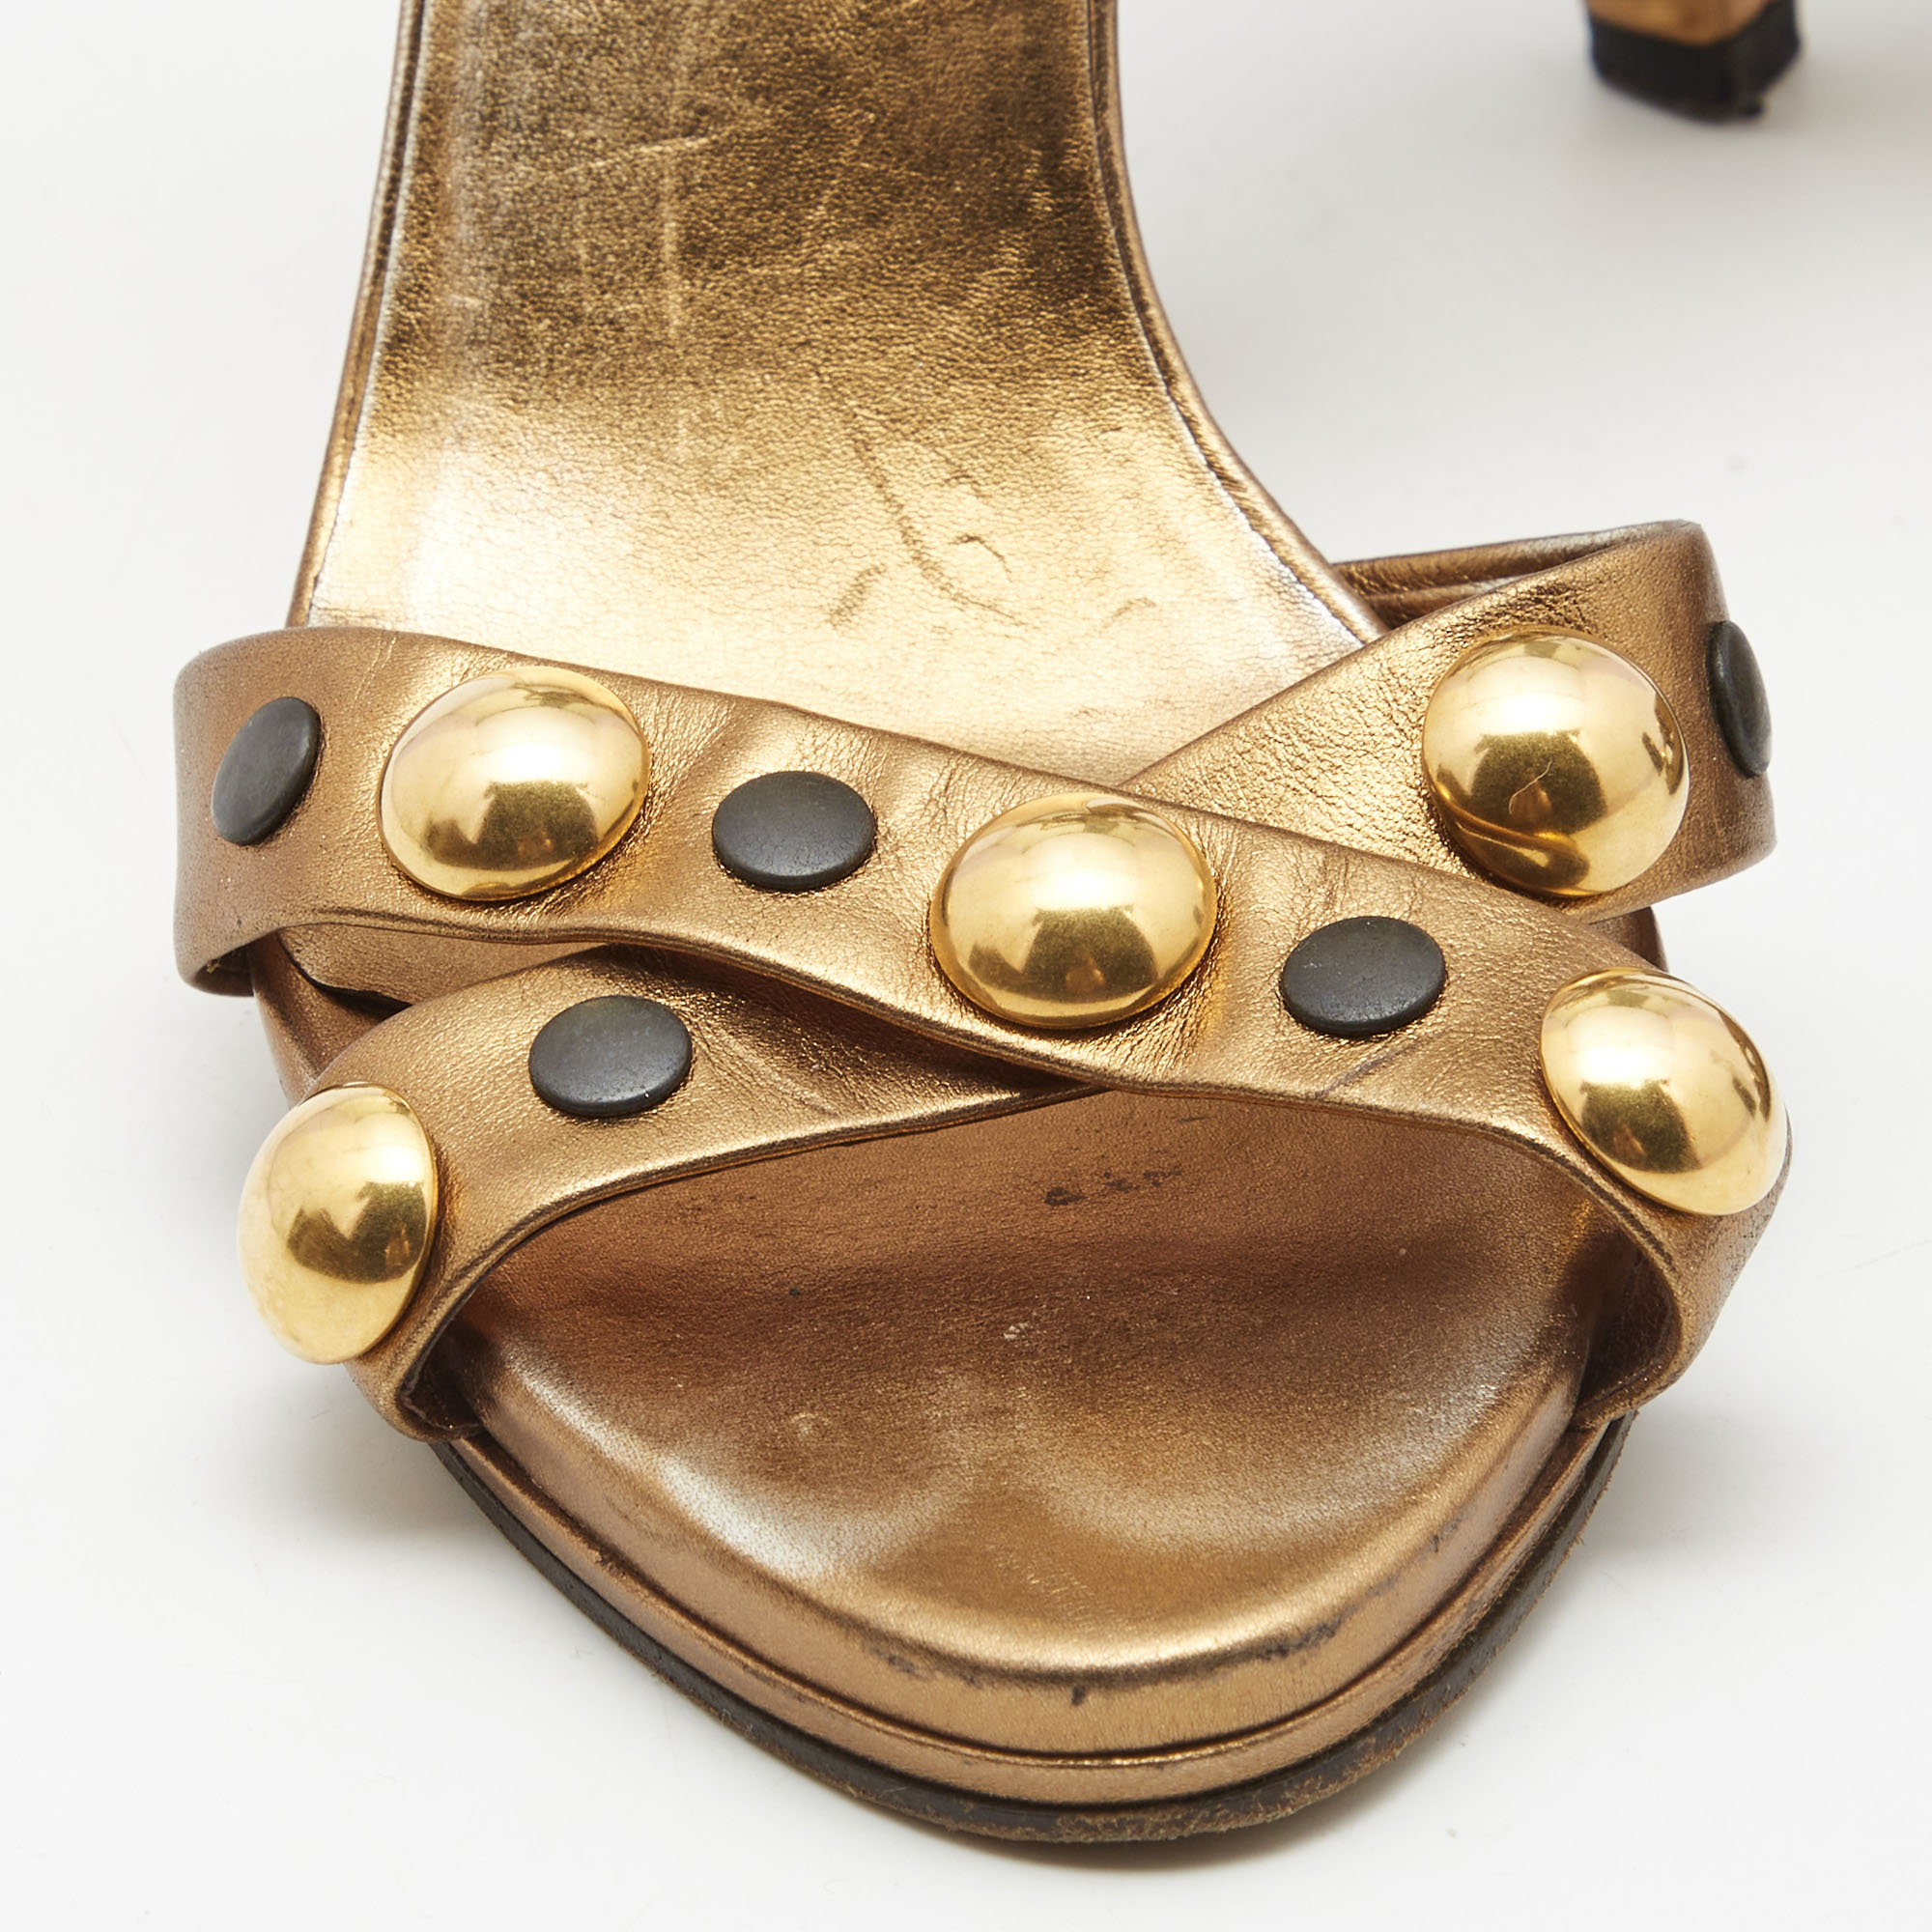 Gucci Metallic Gold Leather Studded Ankle Strap Sandals Size 37.5